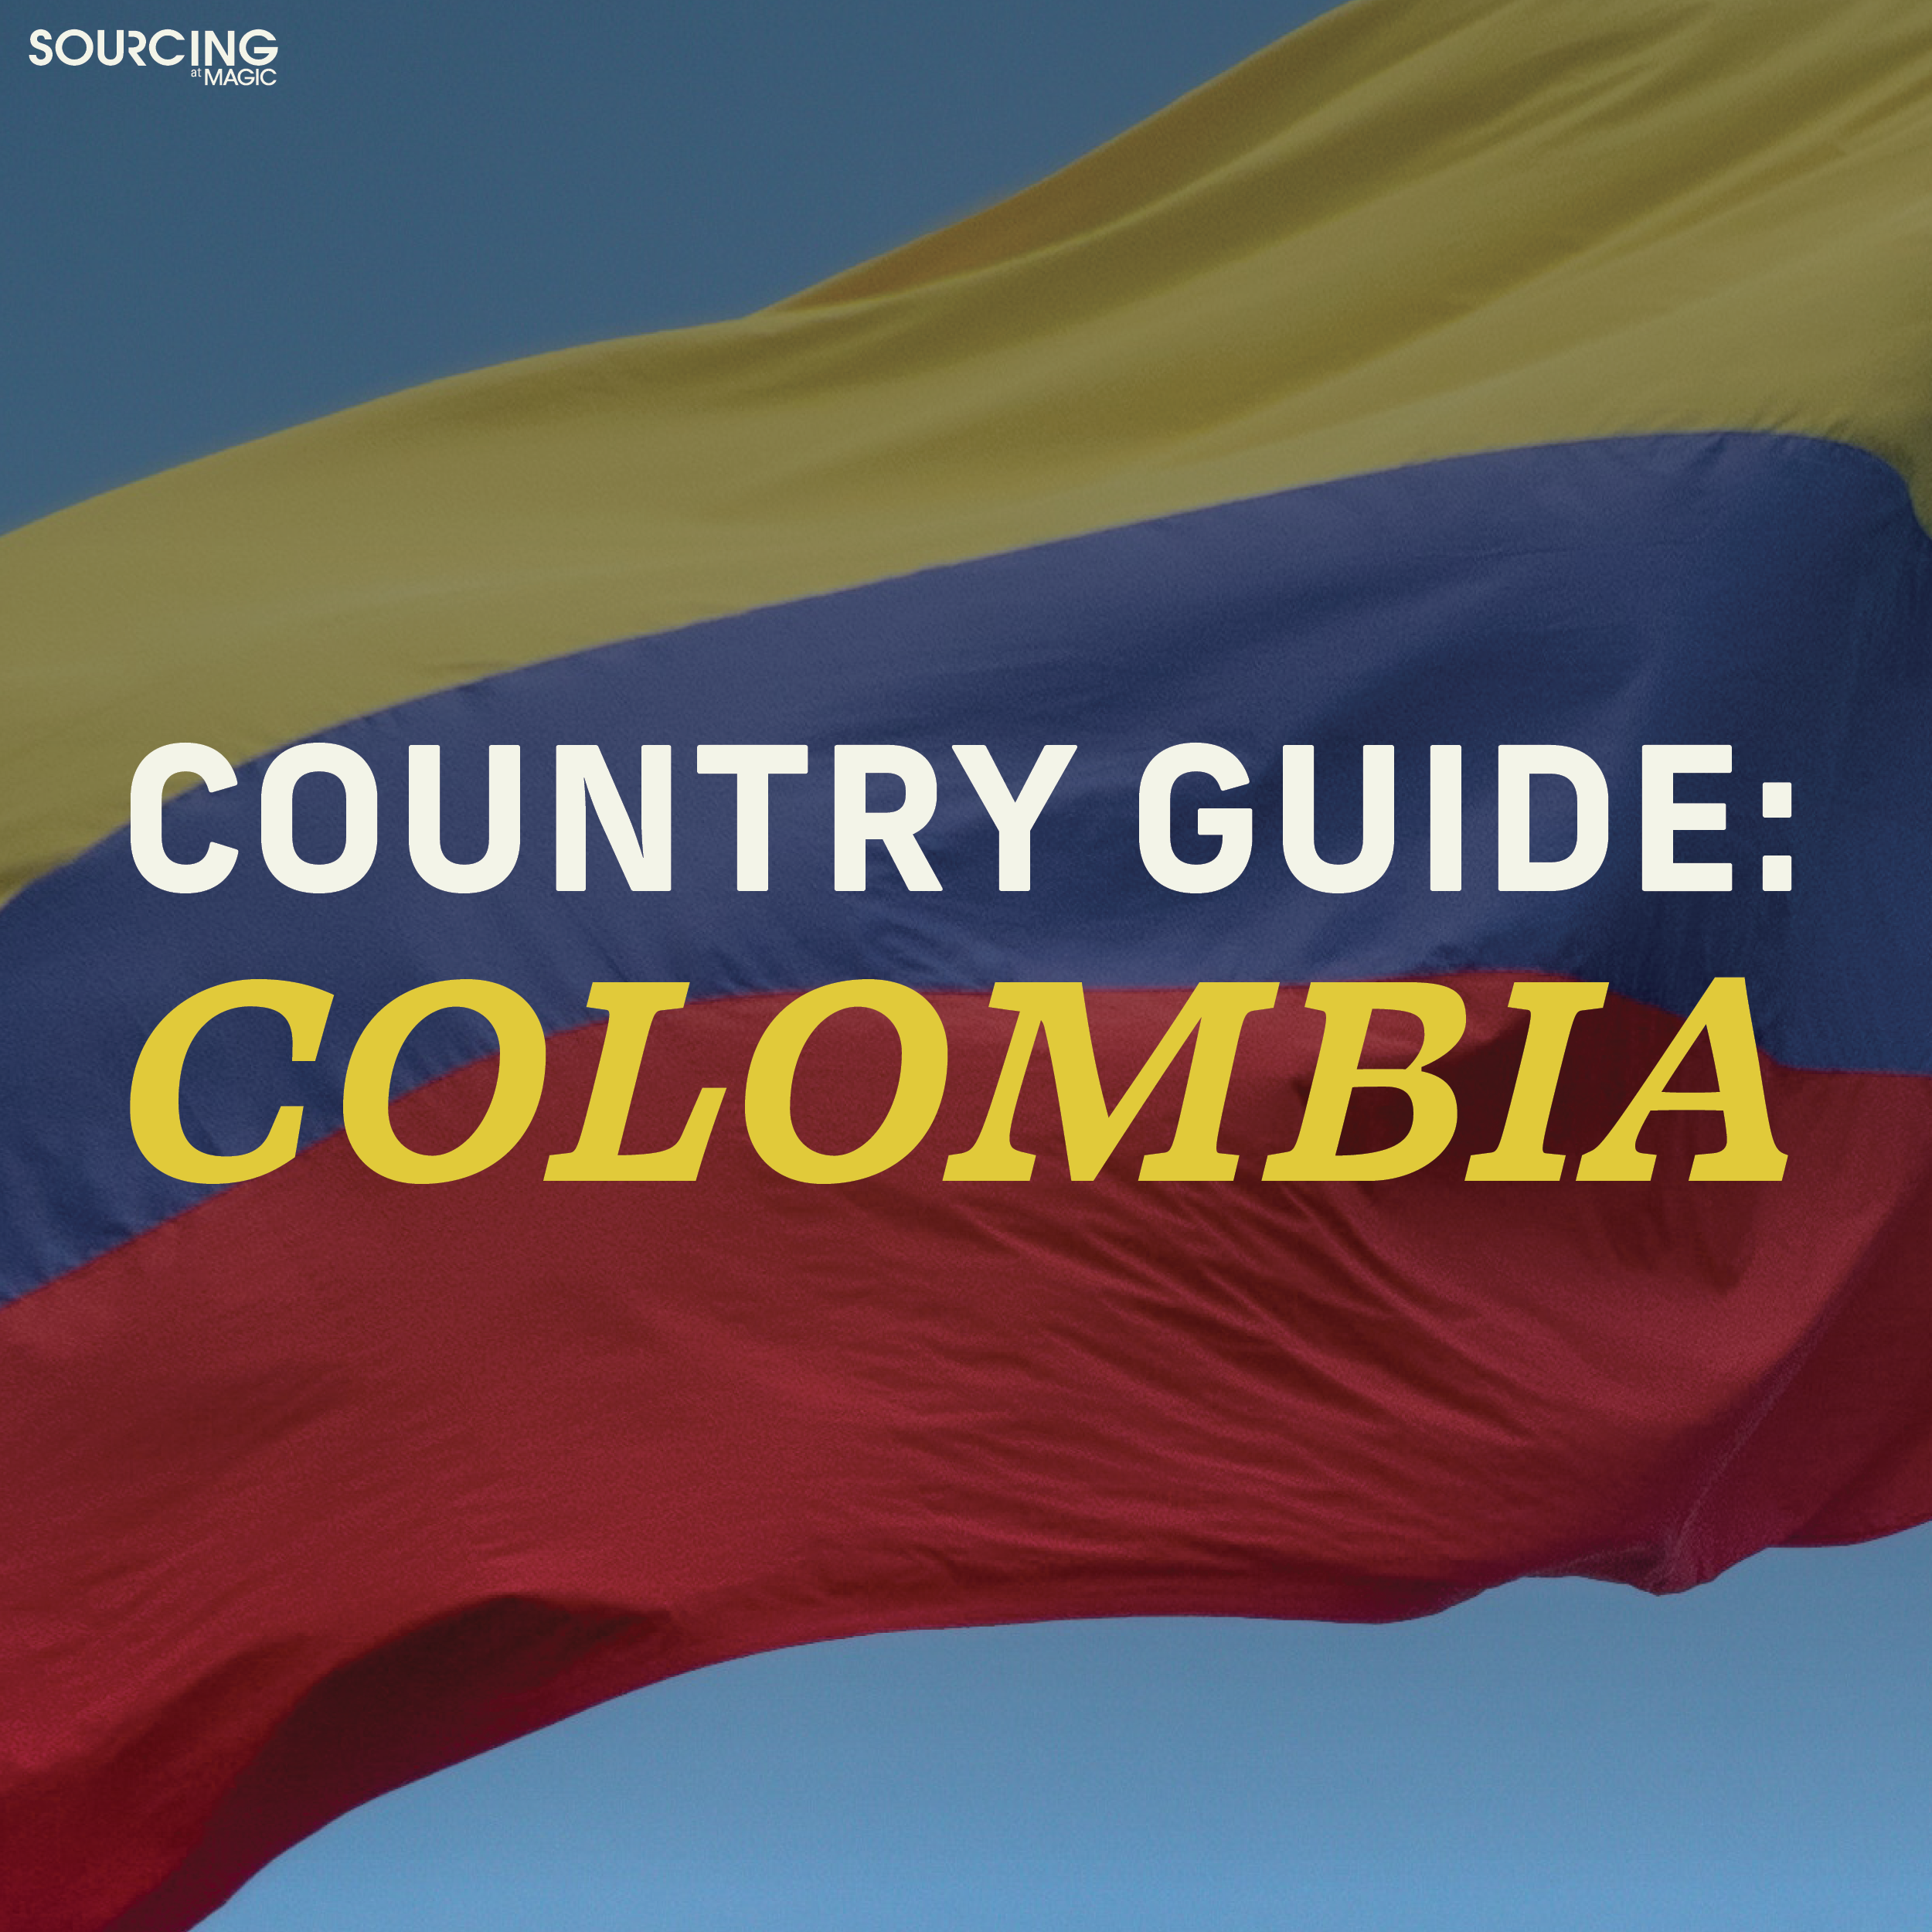 SOURCING at MAGIC: Country Guide - Colombia